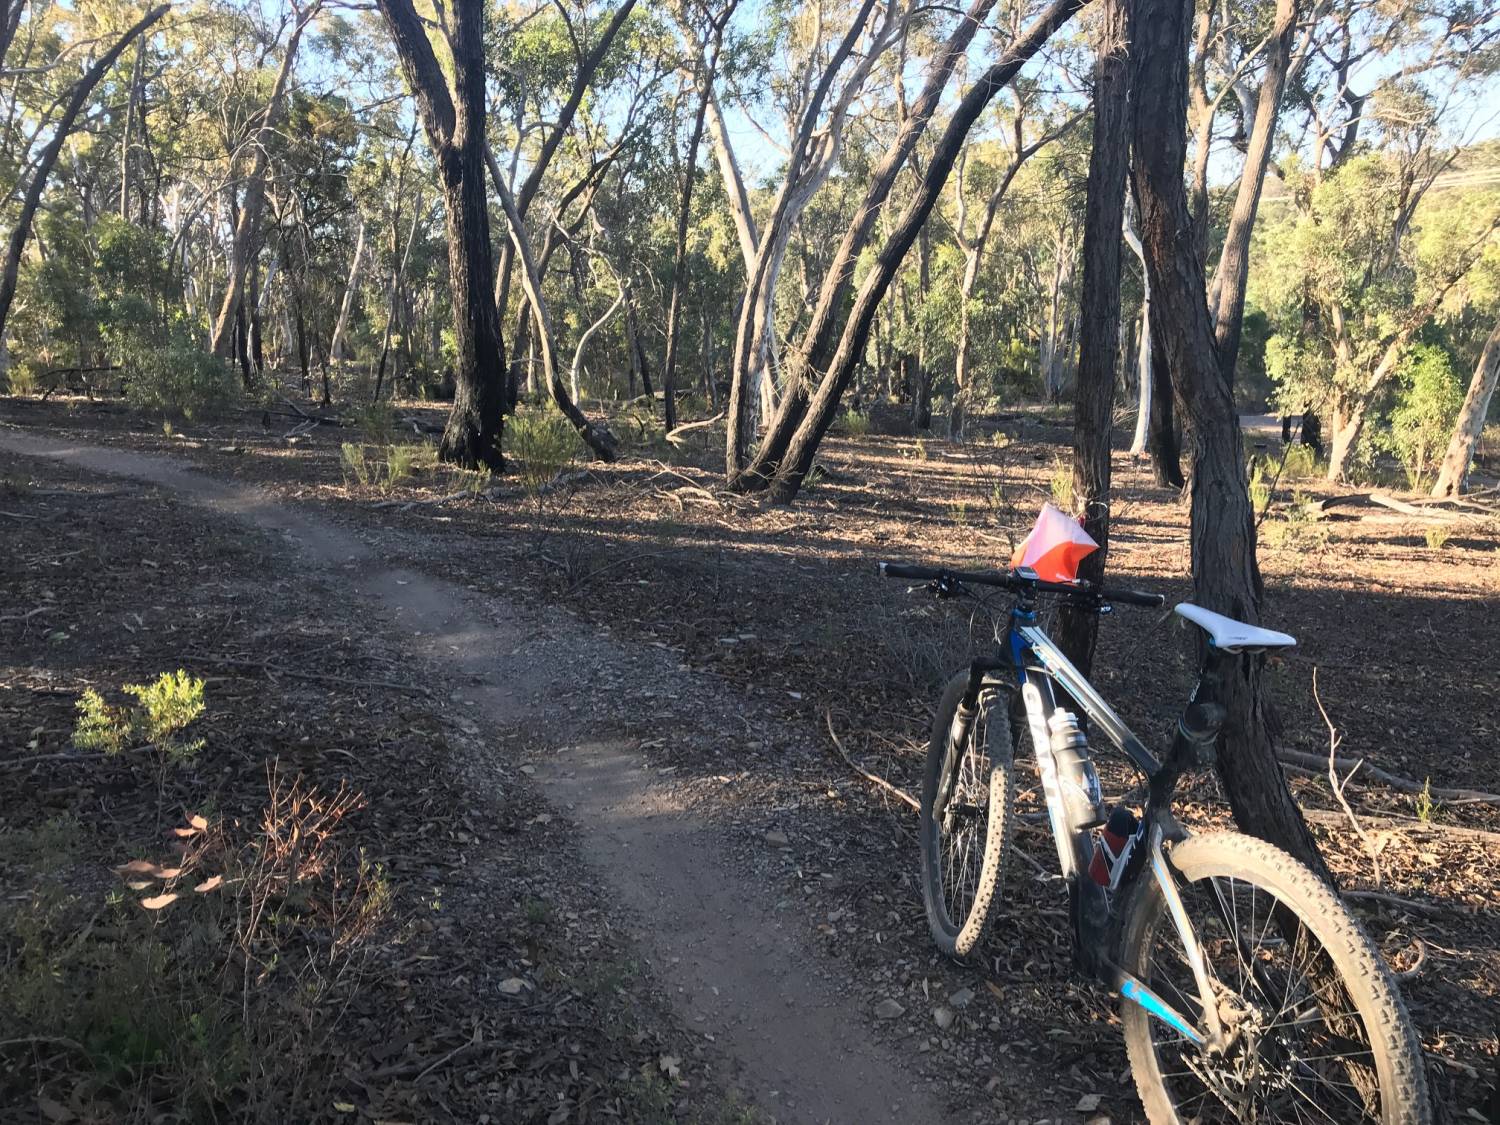 Entries Open for MTBO #2